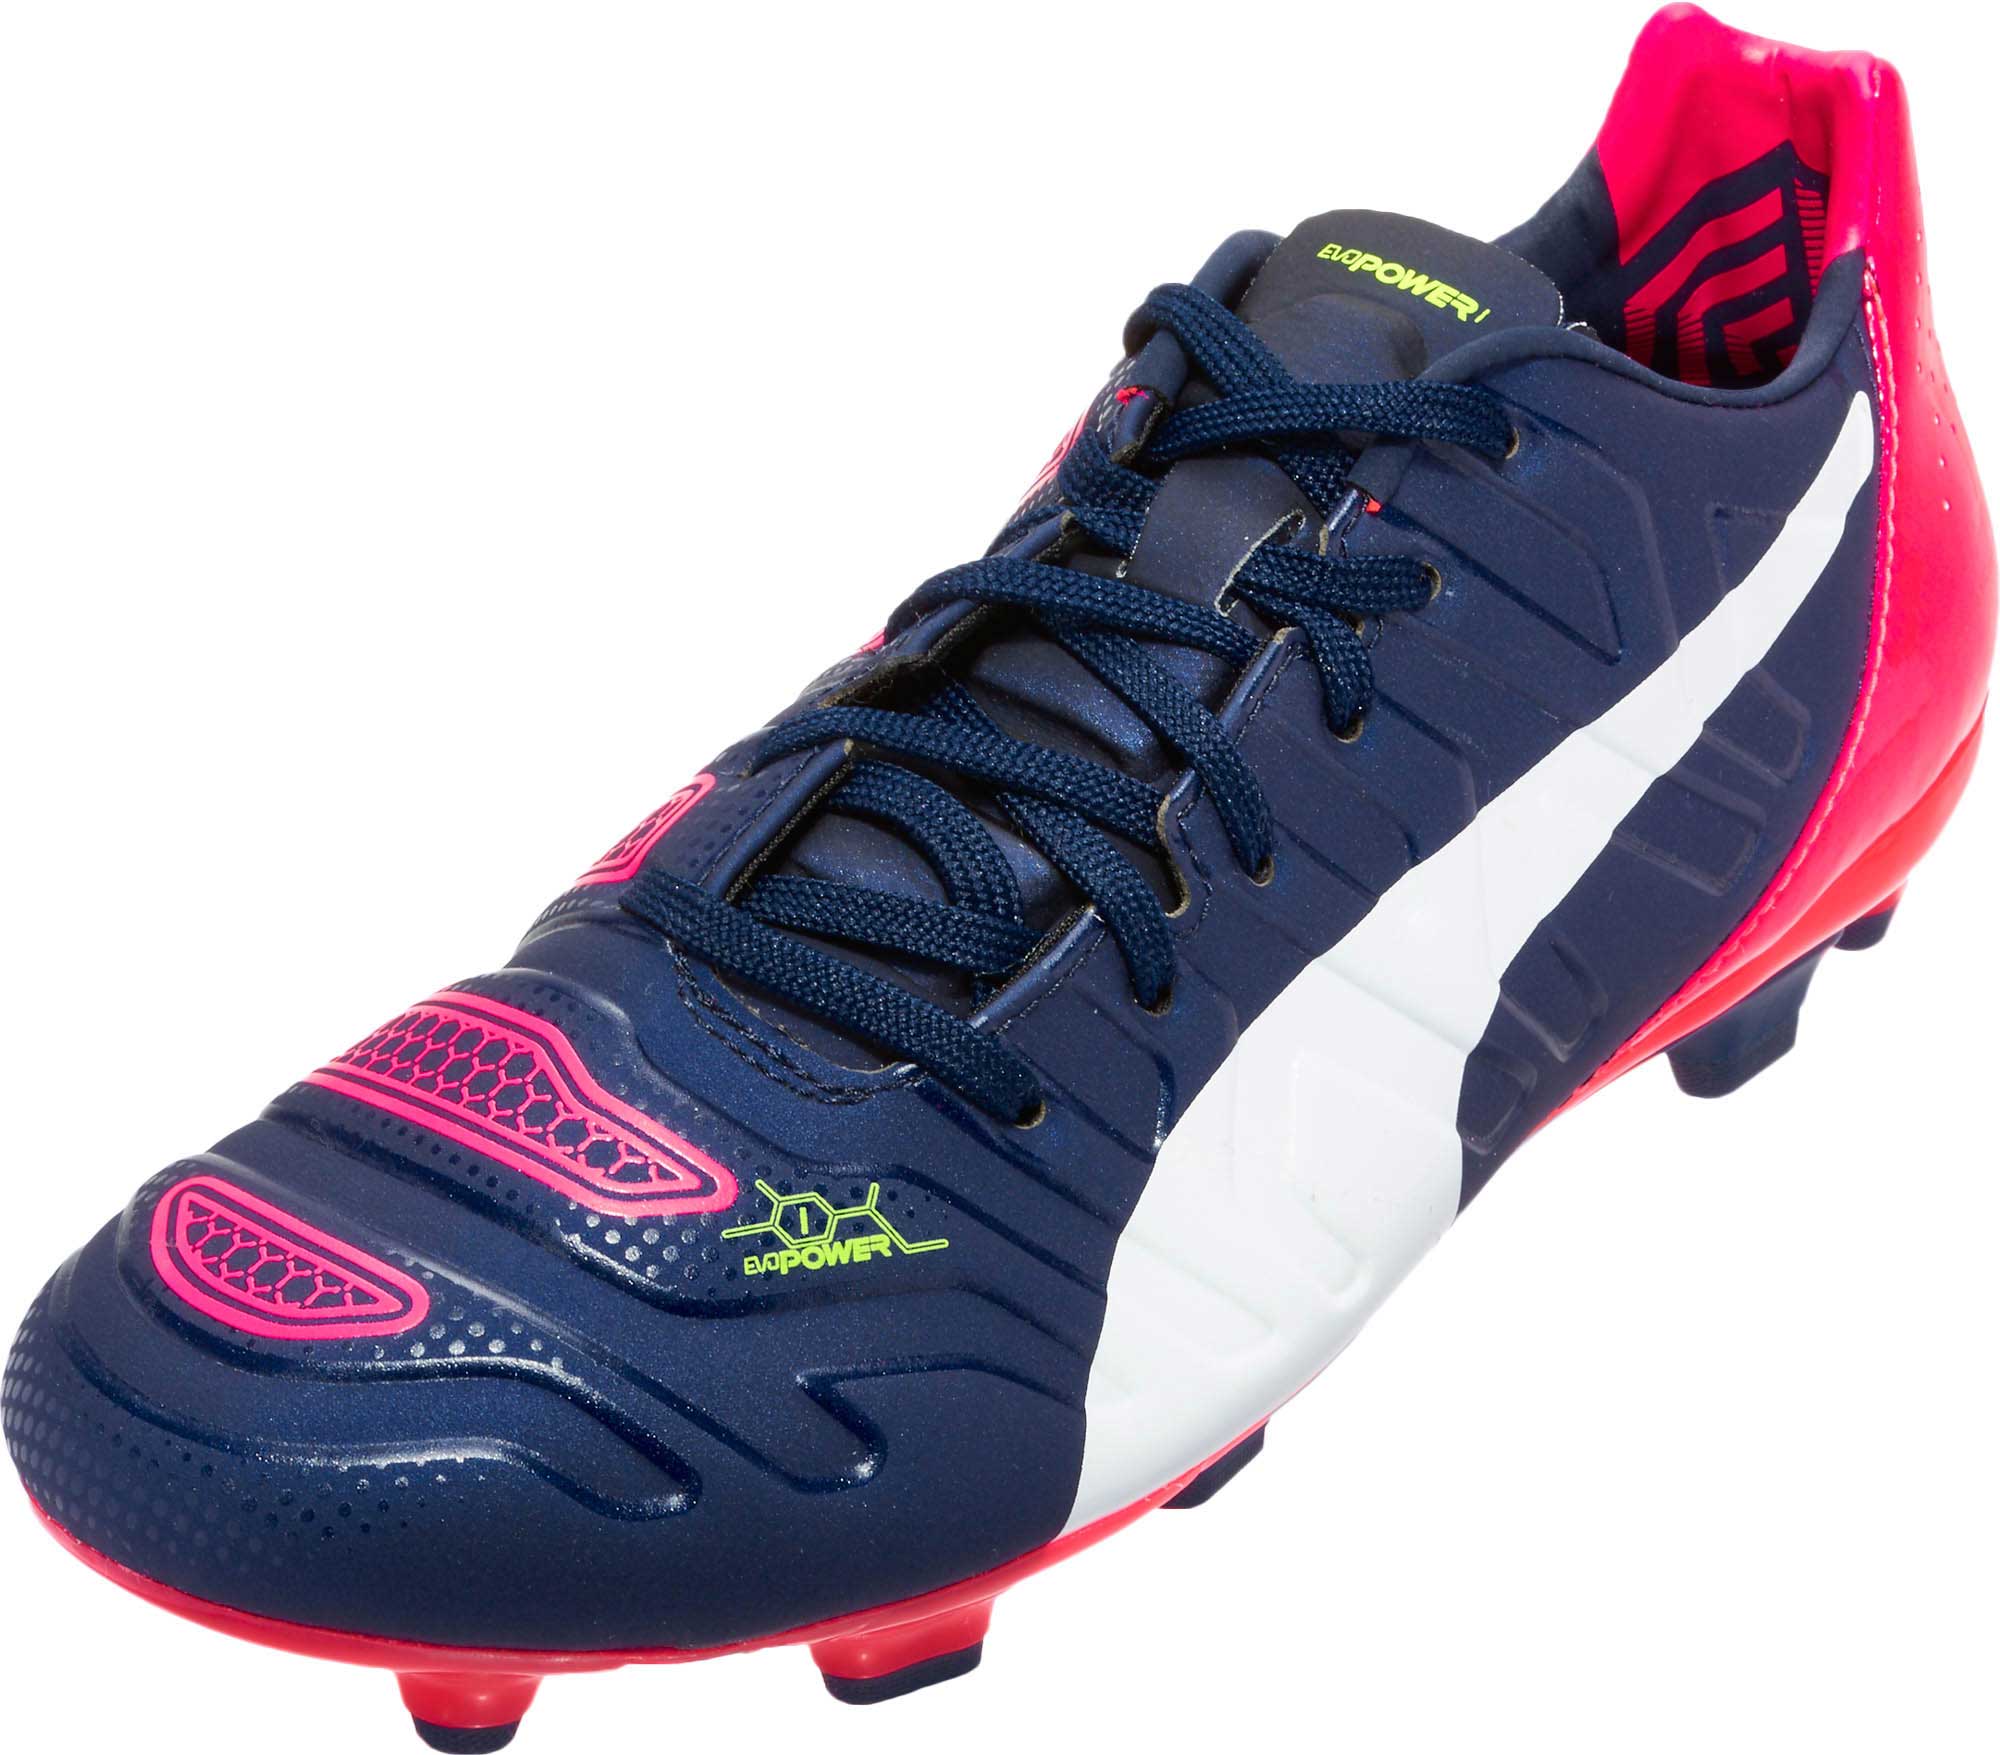 Buy > puma soccer cleats evopower > in stock